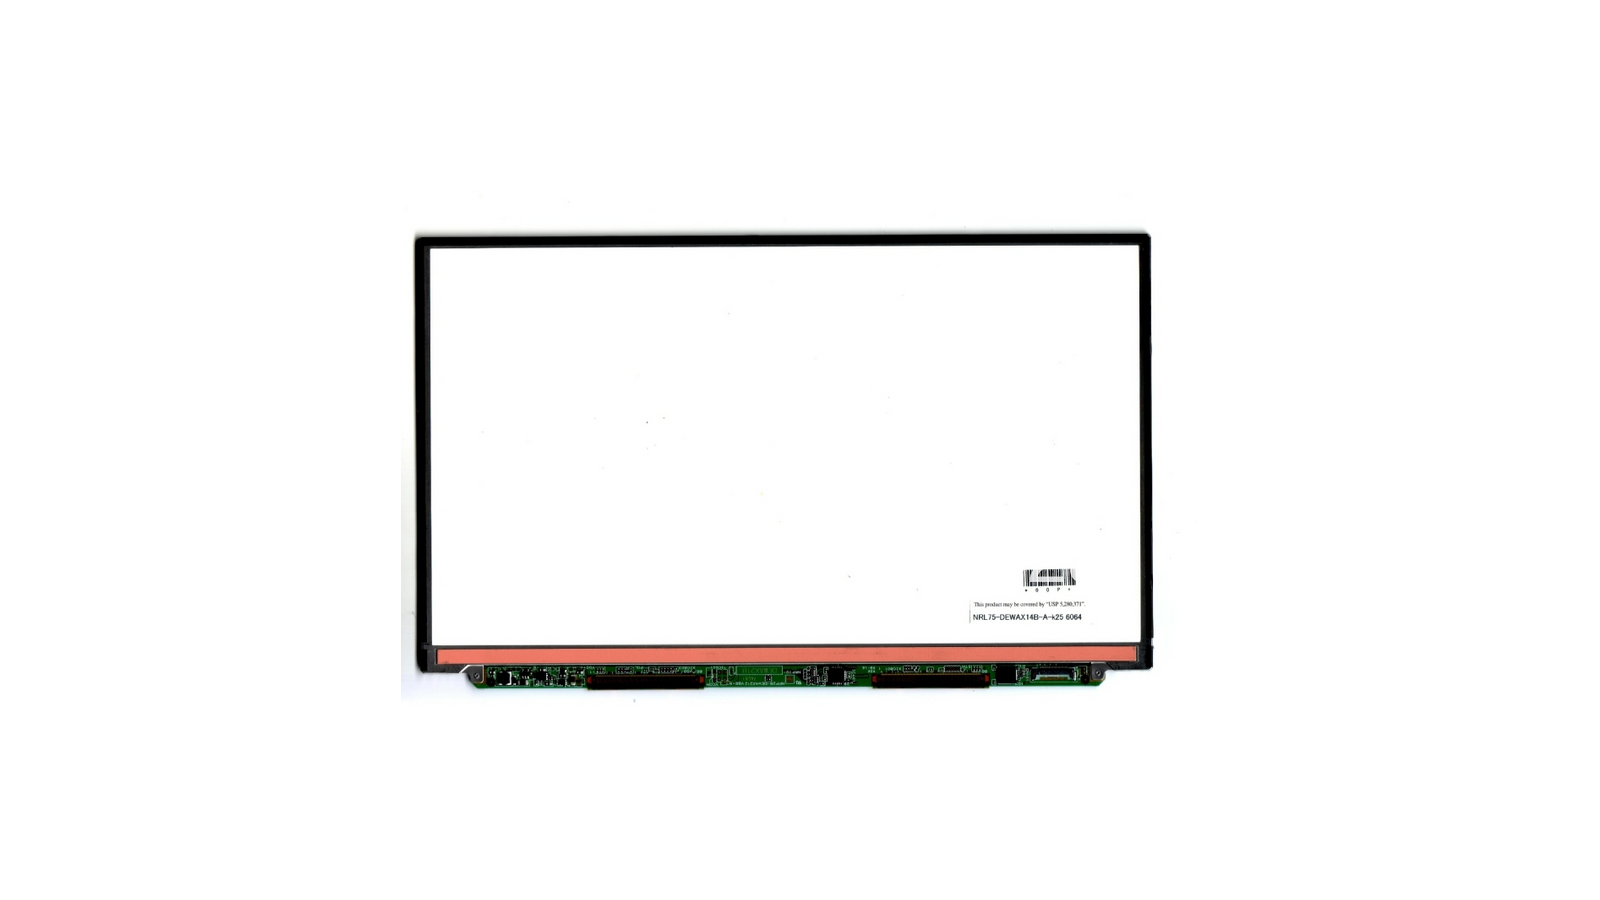 Display LCD Schermo 11,1 LED per Sony VAIO VGN-TZ